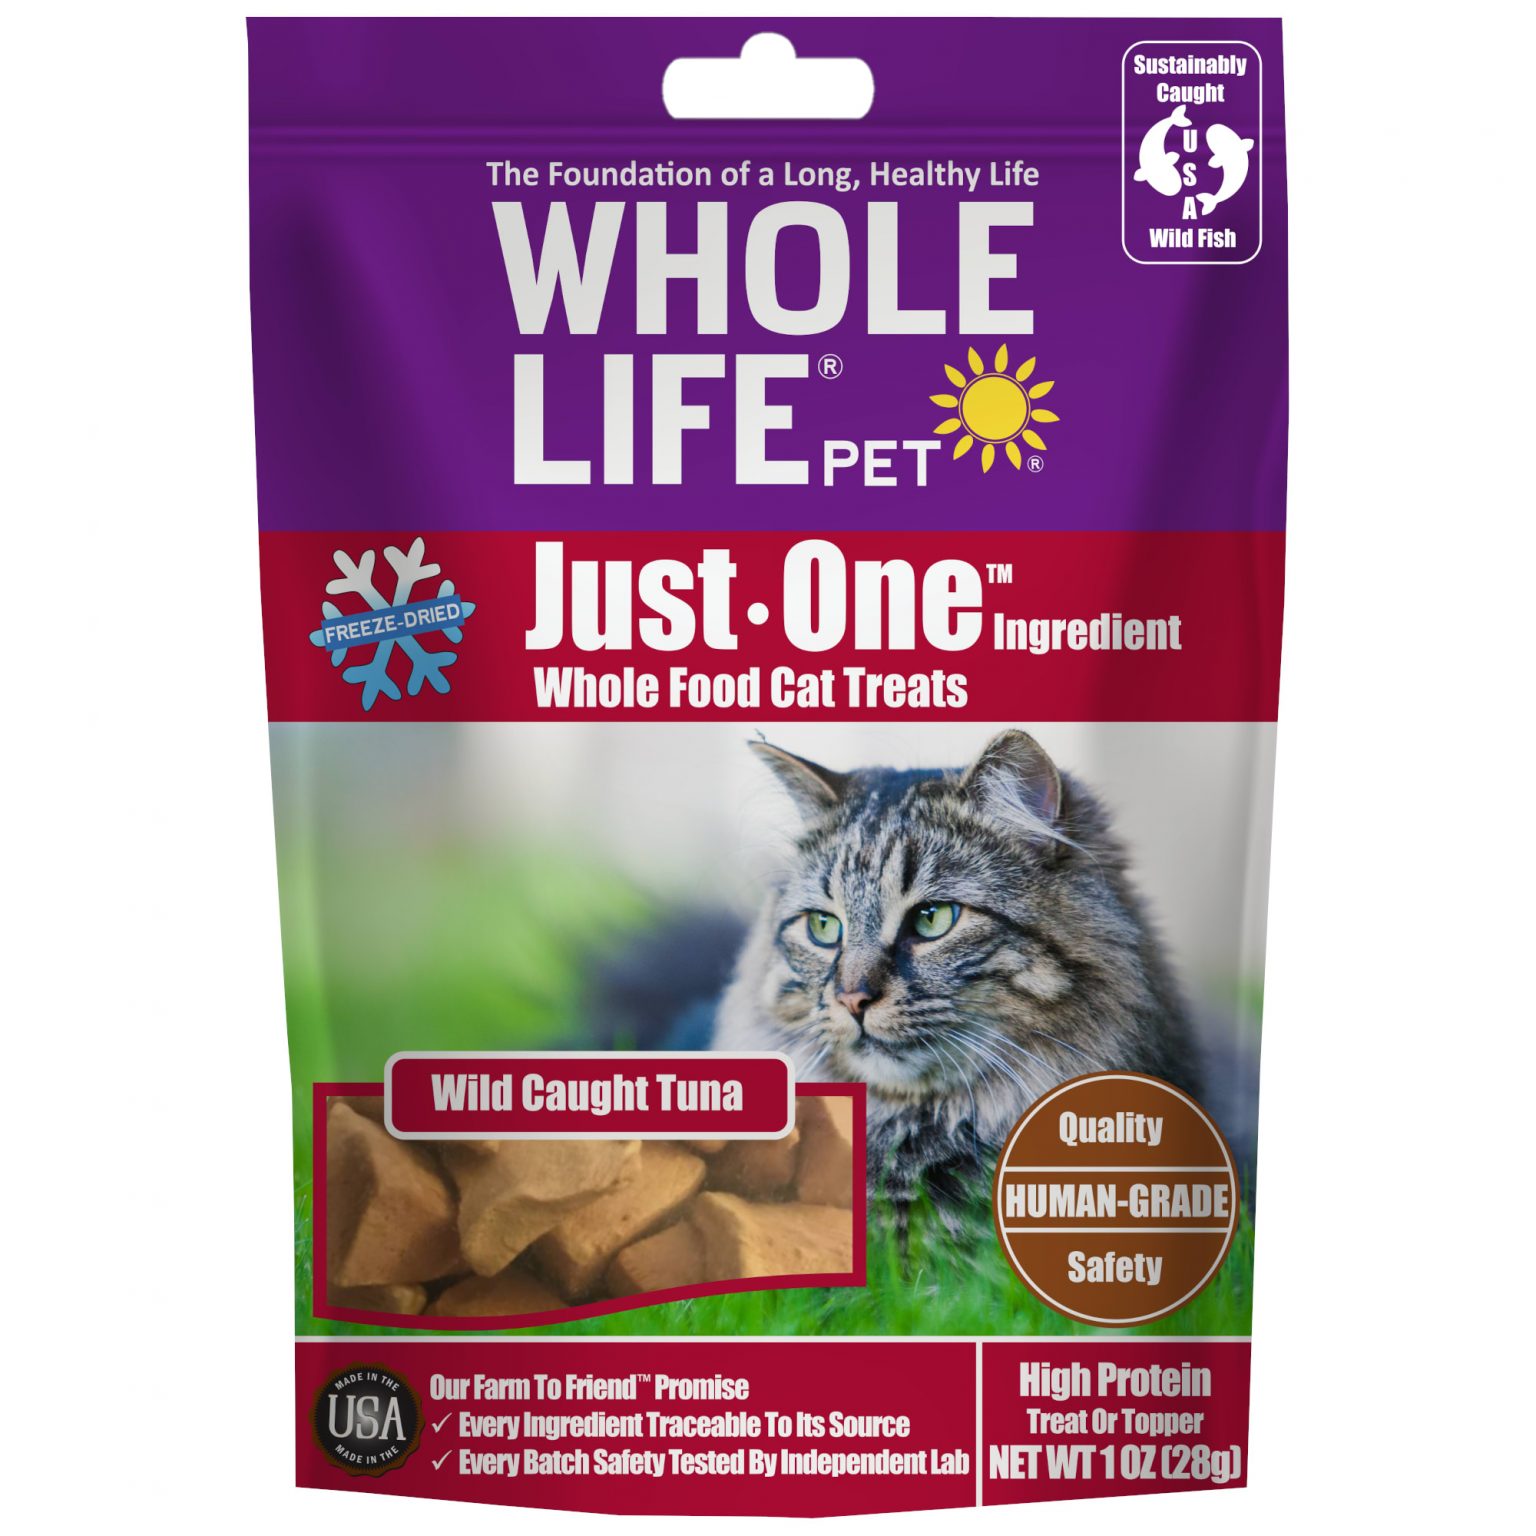 Whole Life Pet Just One Ingredient Pure Tuna Fillet Cat Treats Pet